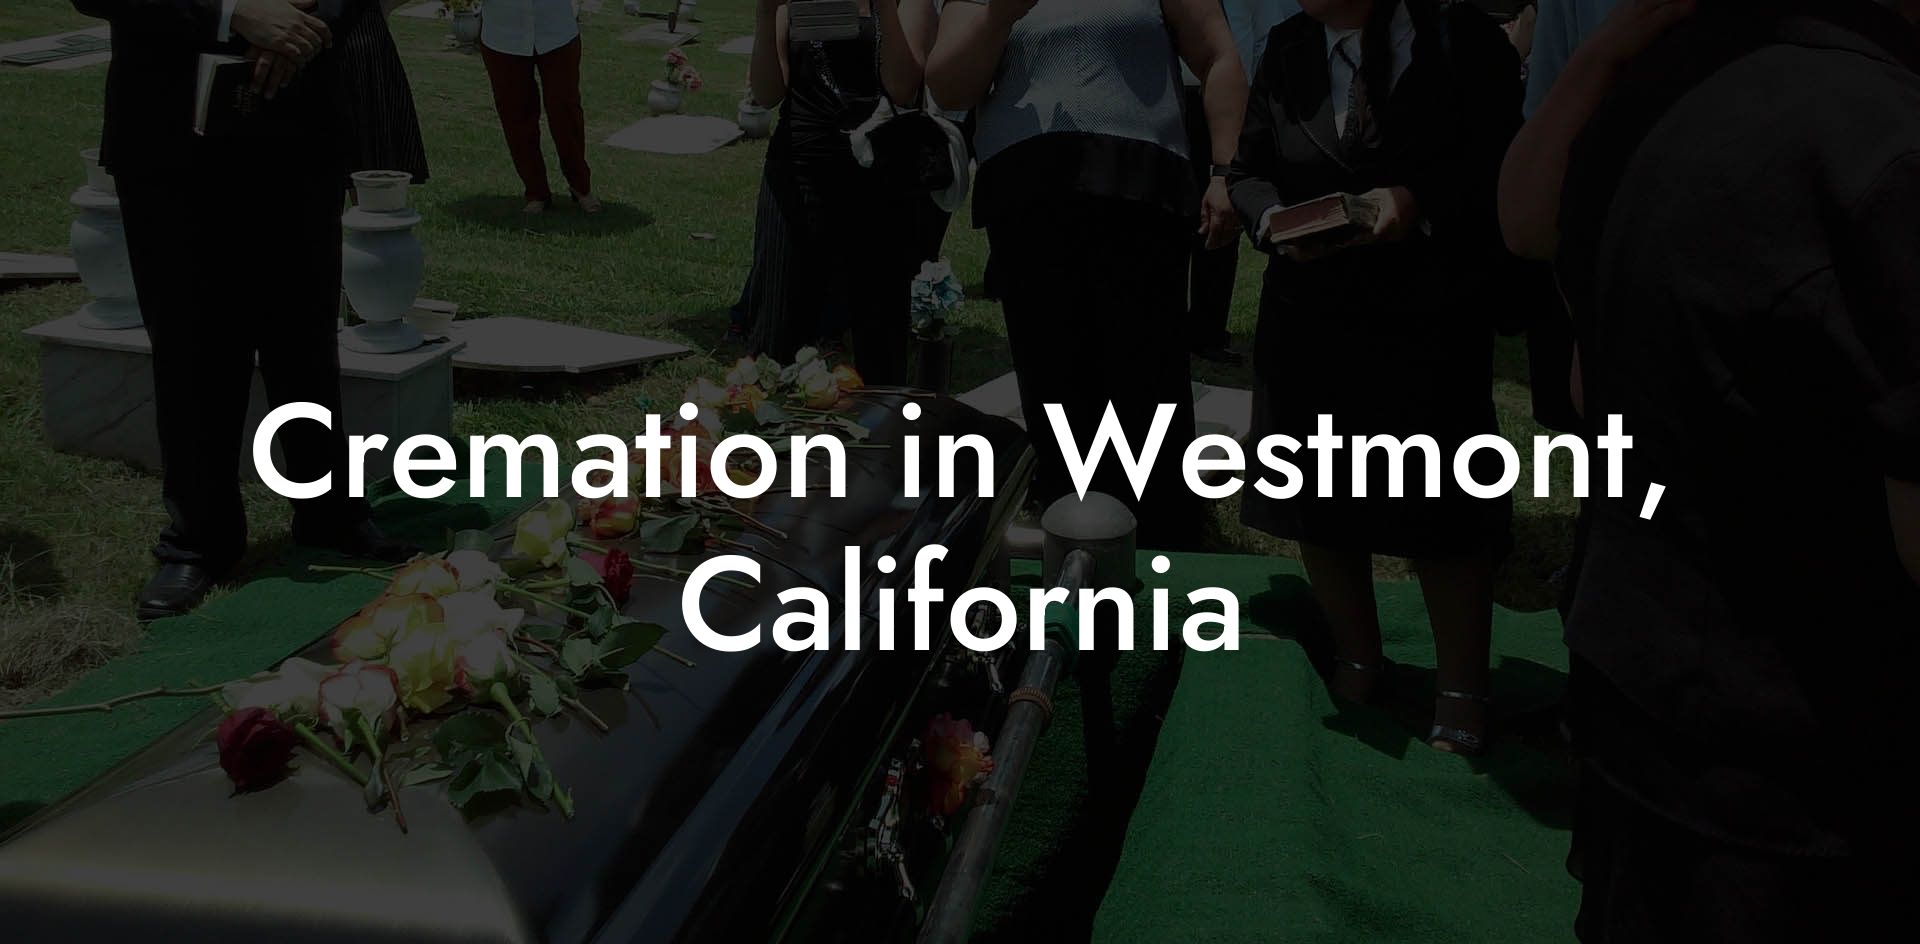 Cremation in Westmont, California